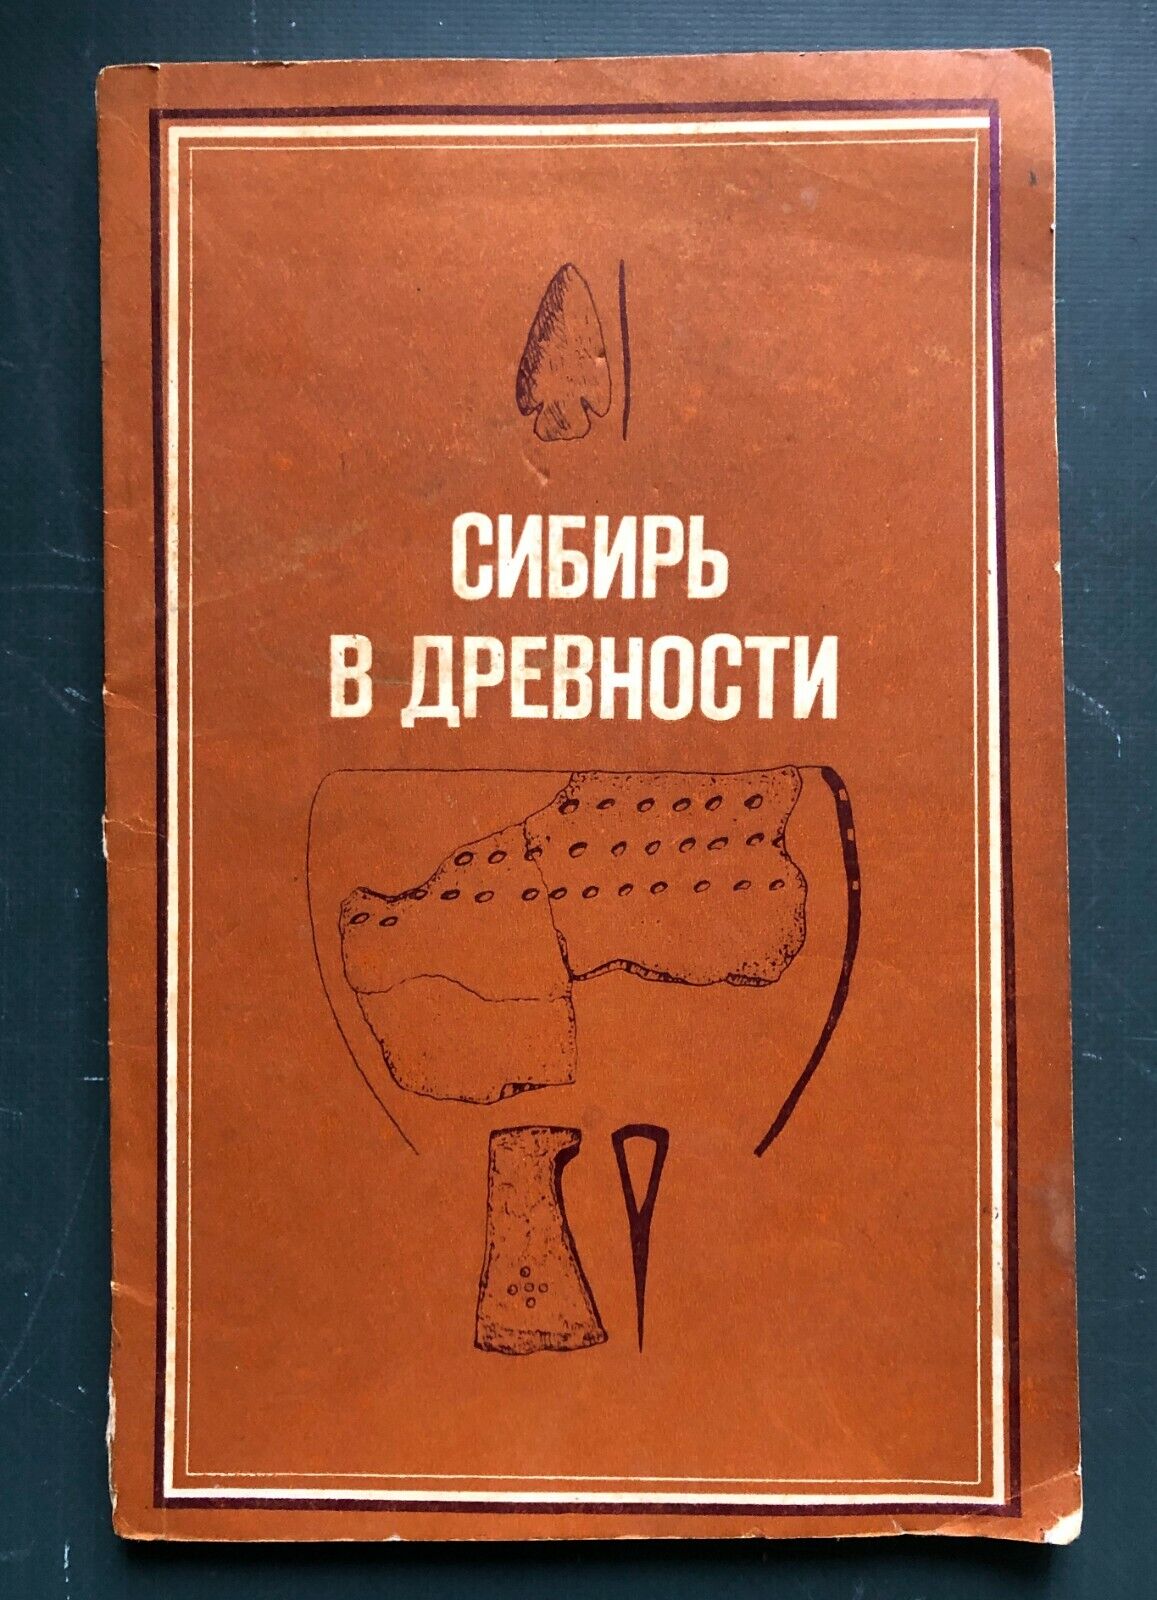 1979 Siberia in Antiquity Altai Ancient Archeology Ethno Russian Book Rare 2150